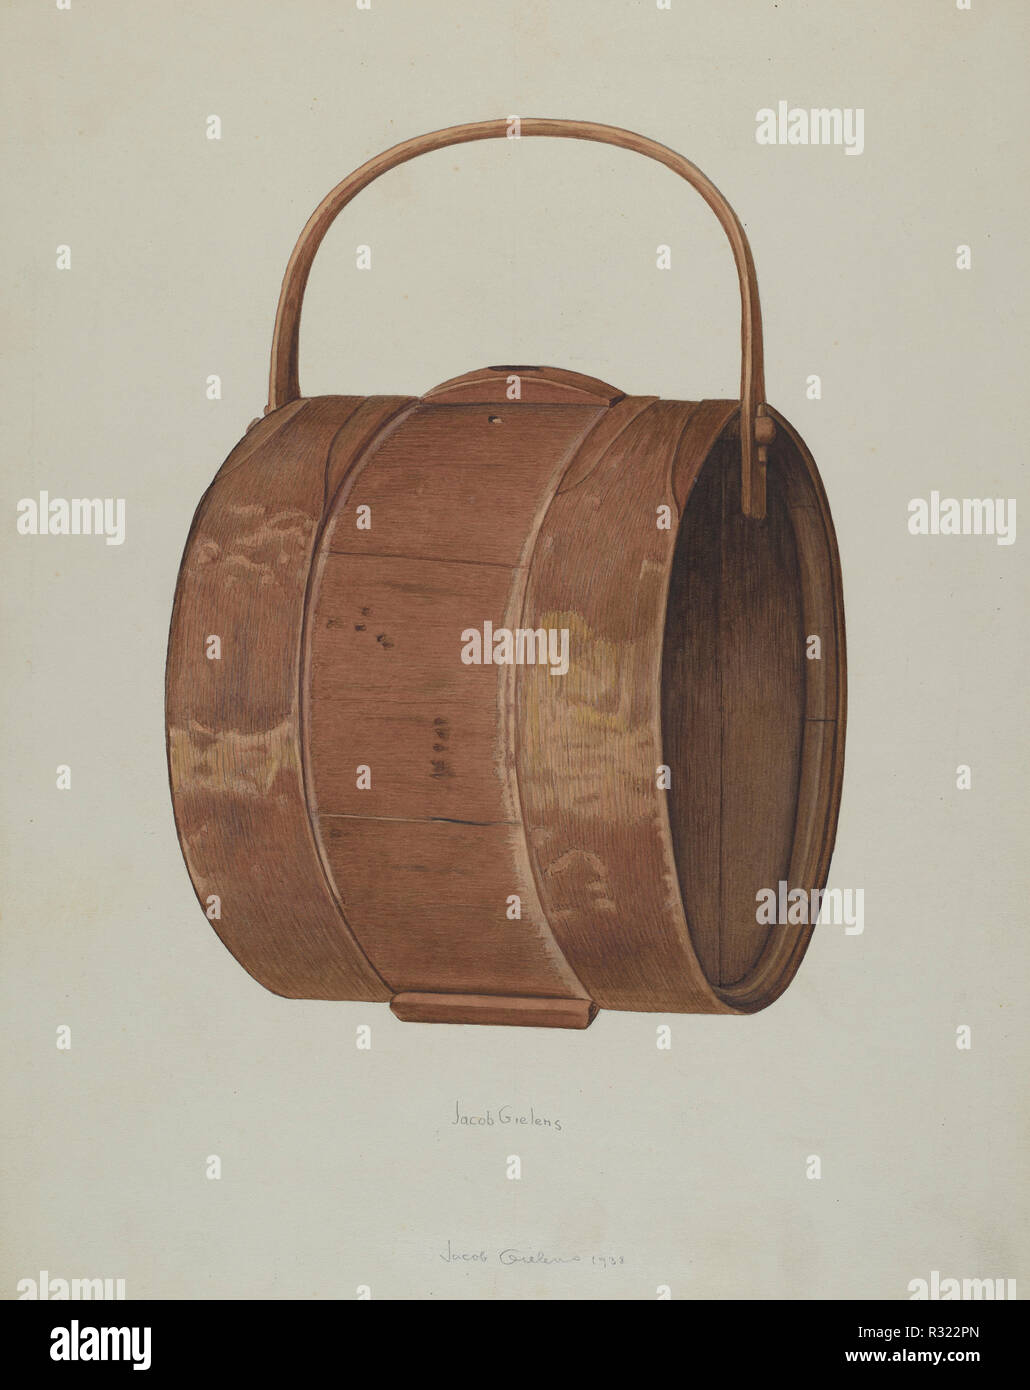 Liquor Container. Dated: 1938. Dimensions: overall: 35.6 x 28 cm (14 x 11 in.). Medium: watercolor and graphite on paperboard. Museum: National Gallery of Art, Washington DC. Author: Jacob Gielens. Stock Photo